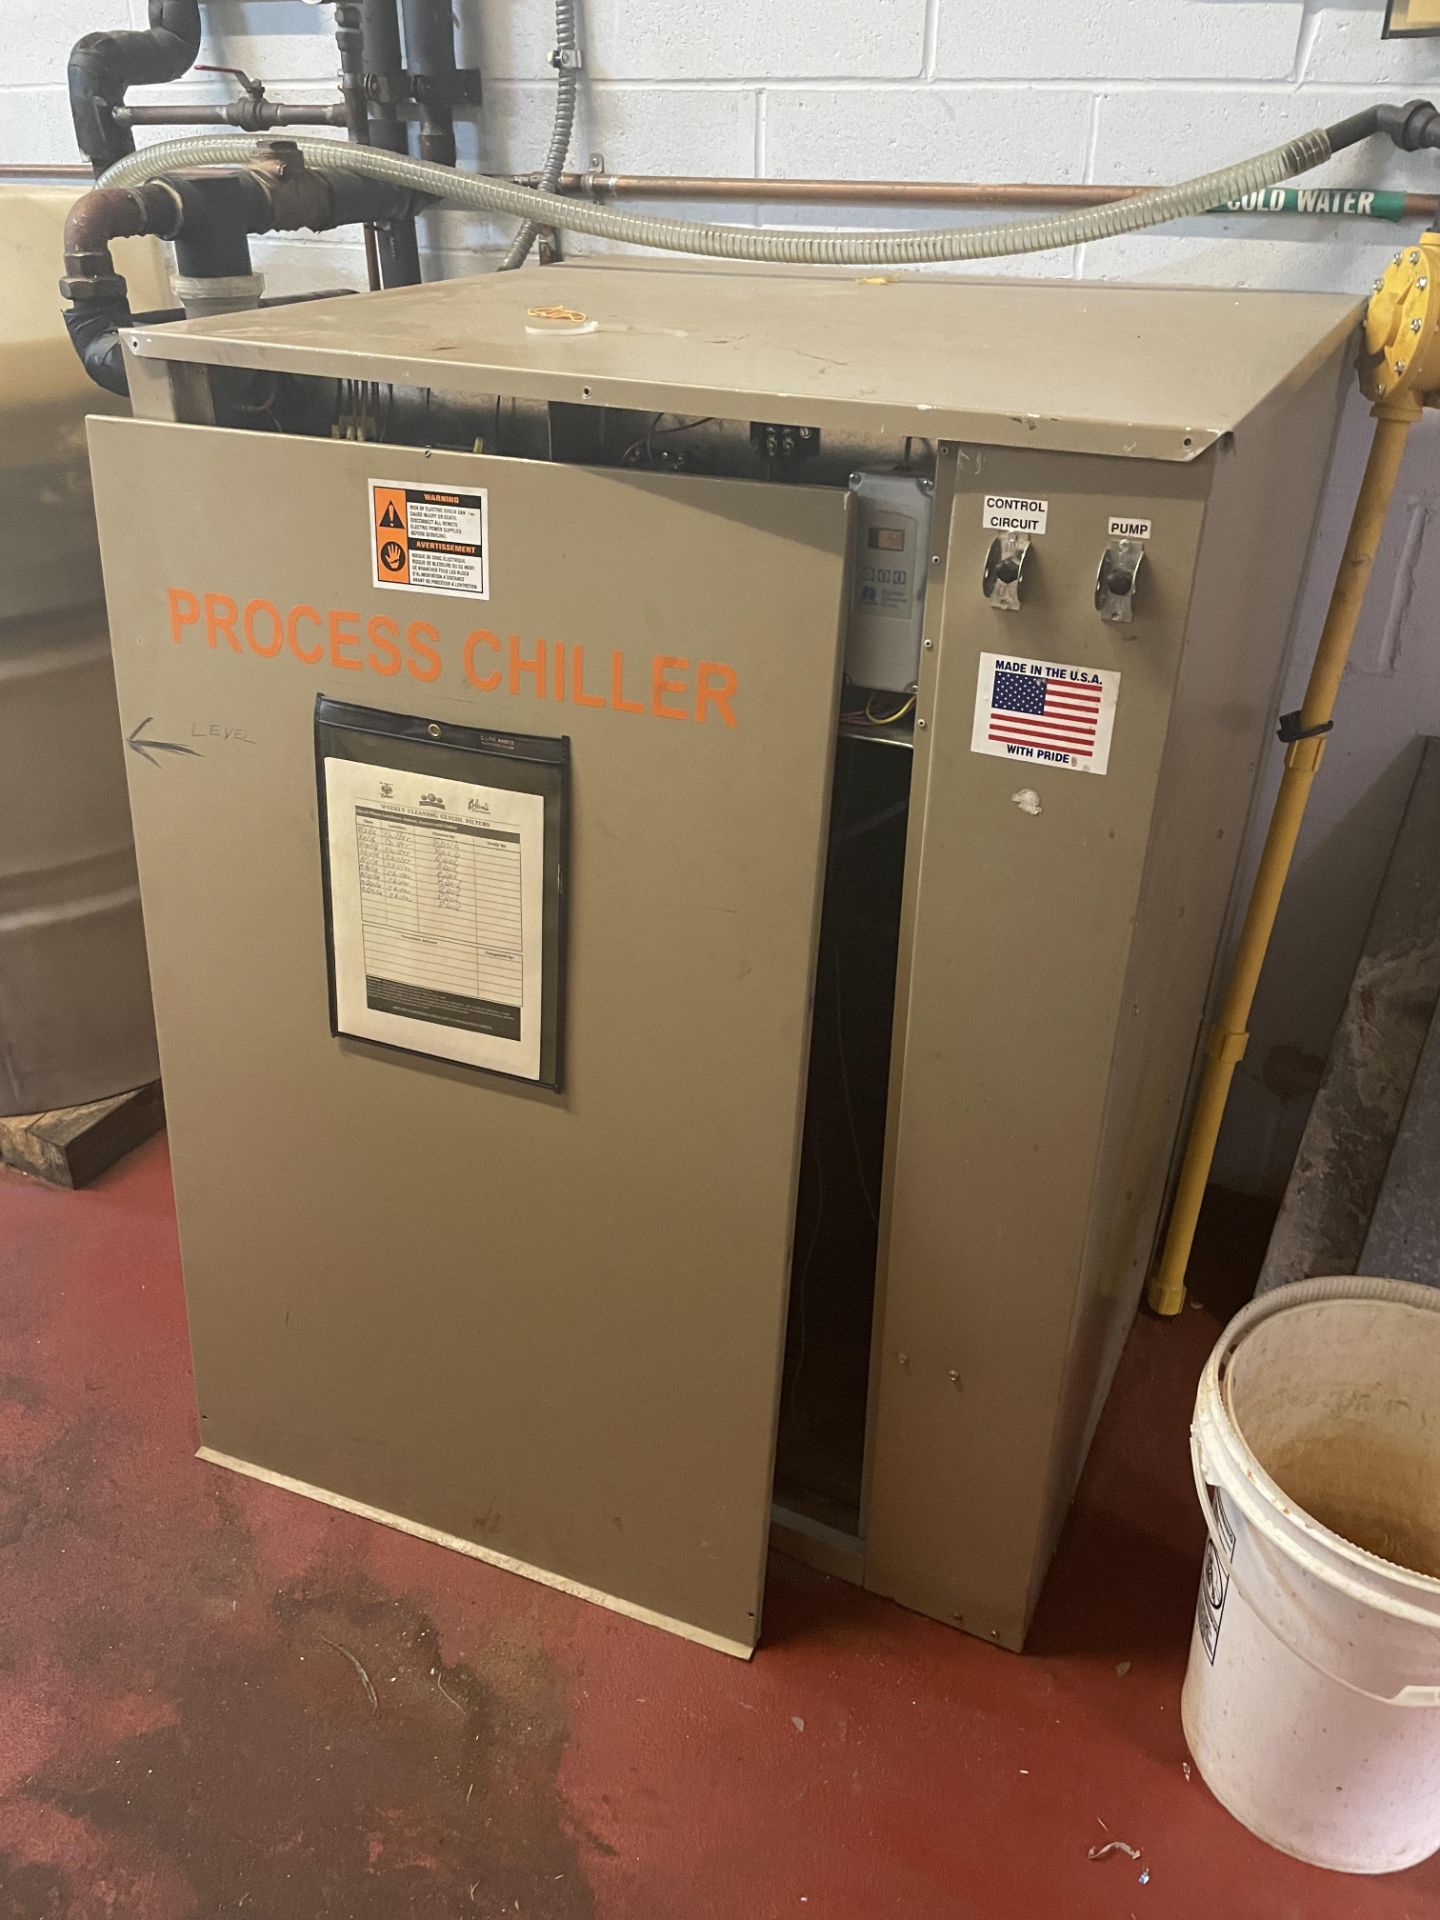 Aqua Products Model CDR-120C-S2S water chiller, 460 volts